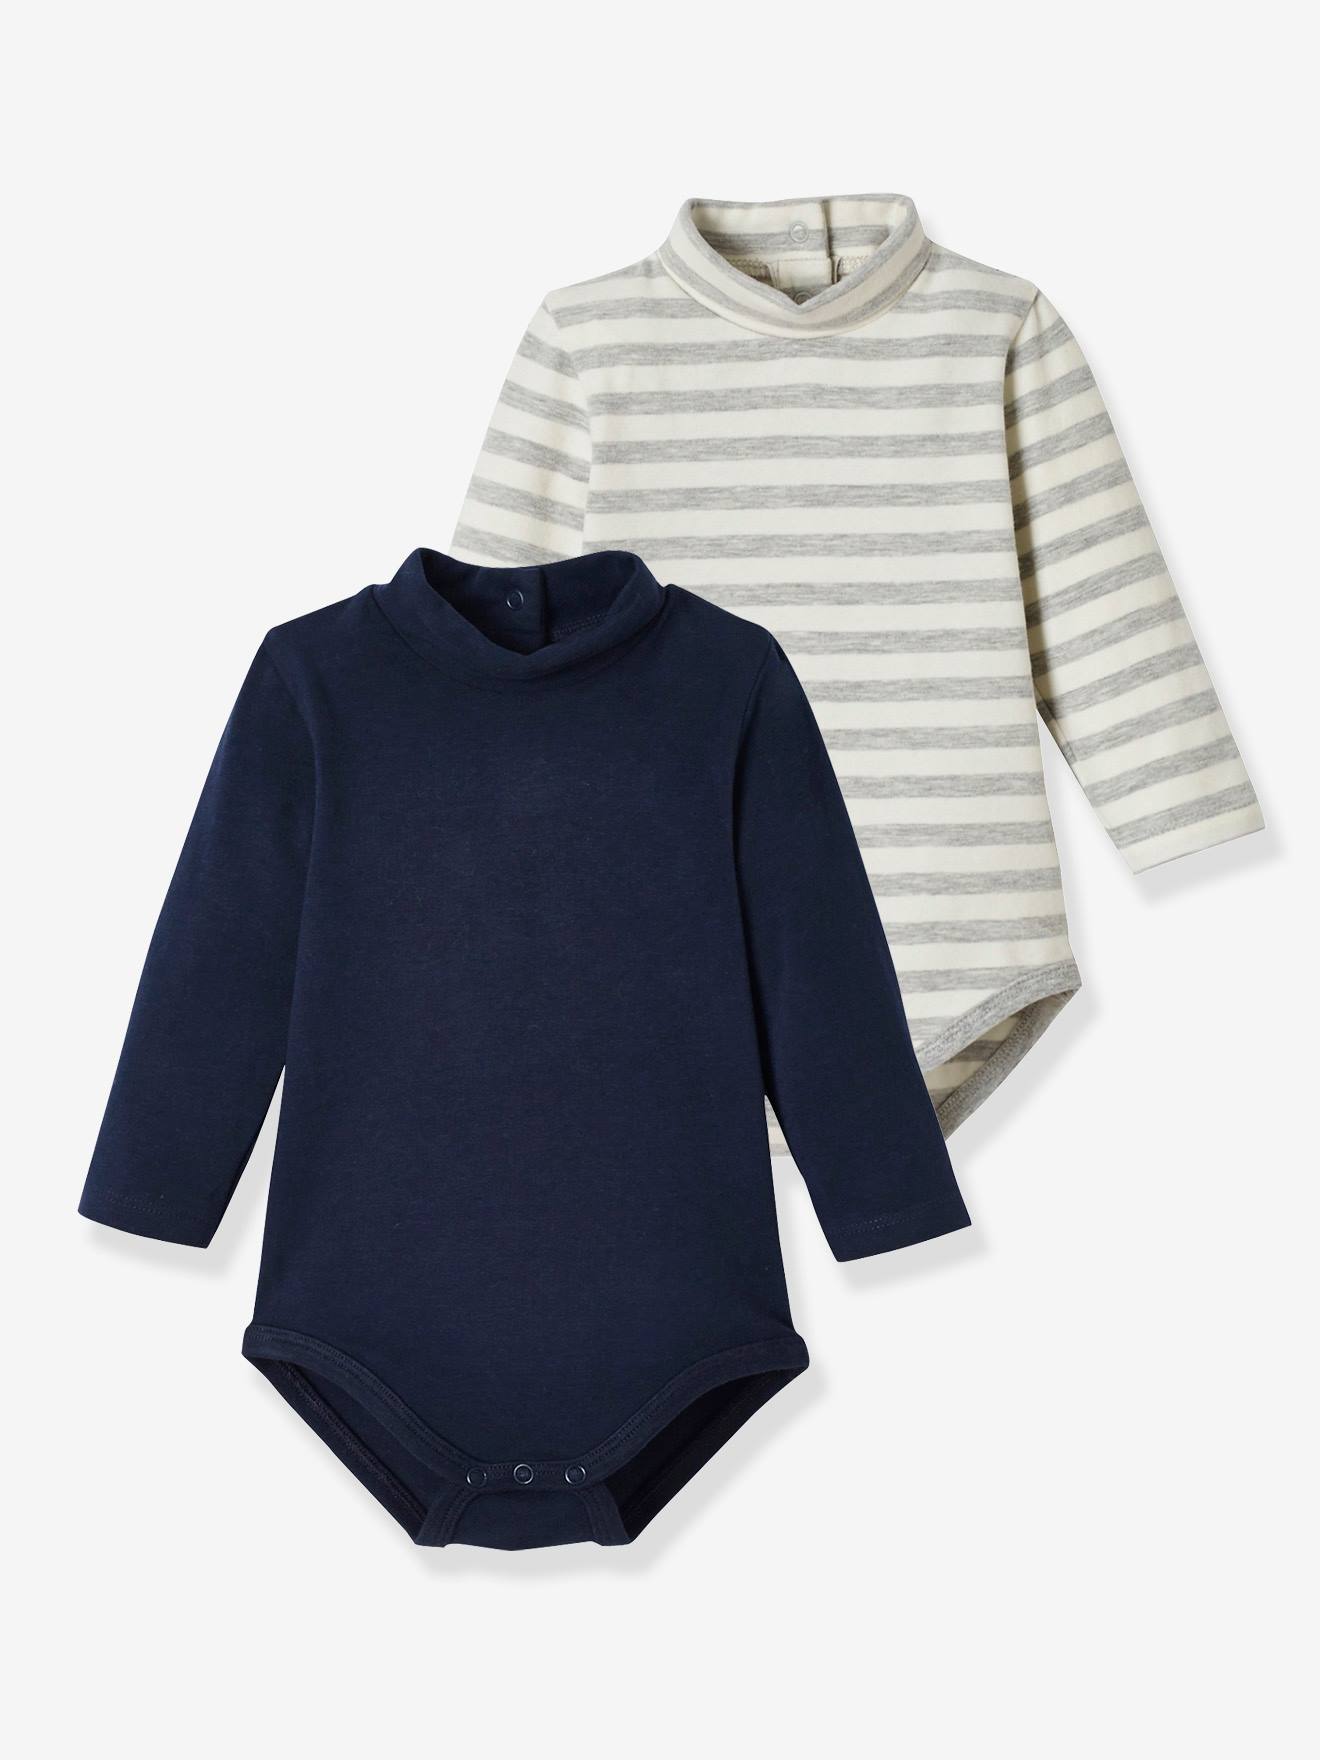 Snoopy  2 Pack Long Sleeve Body for Babies Sizes From 3 to 23 Months 